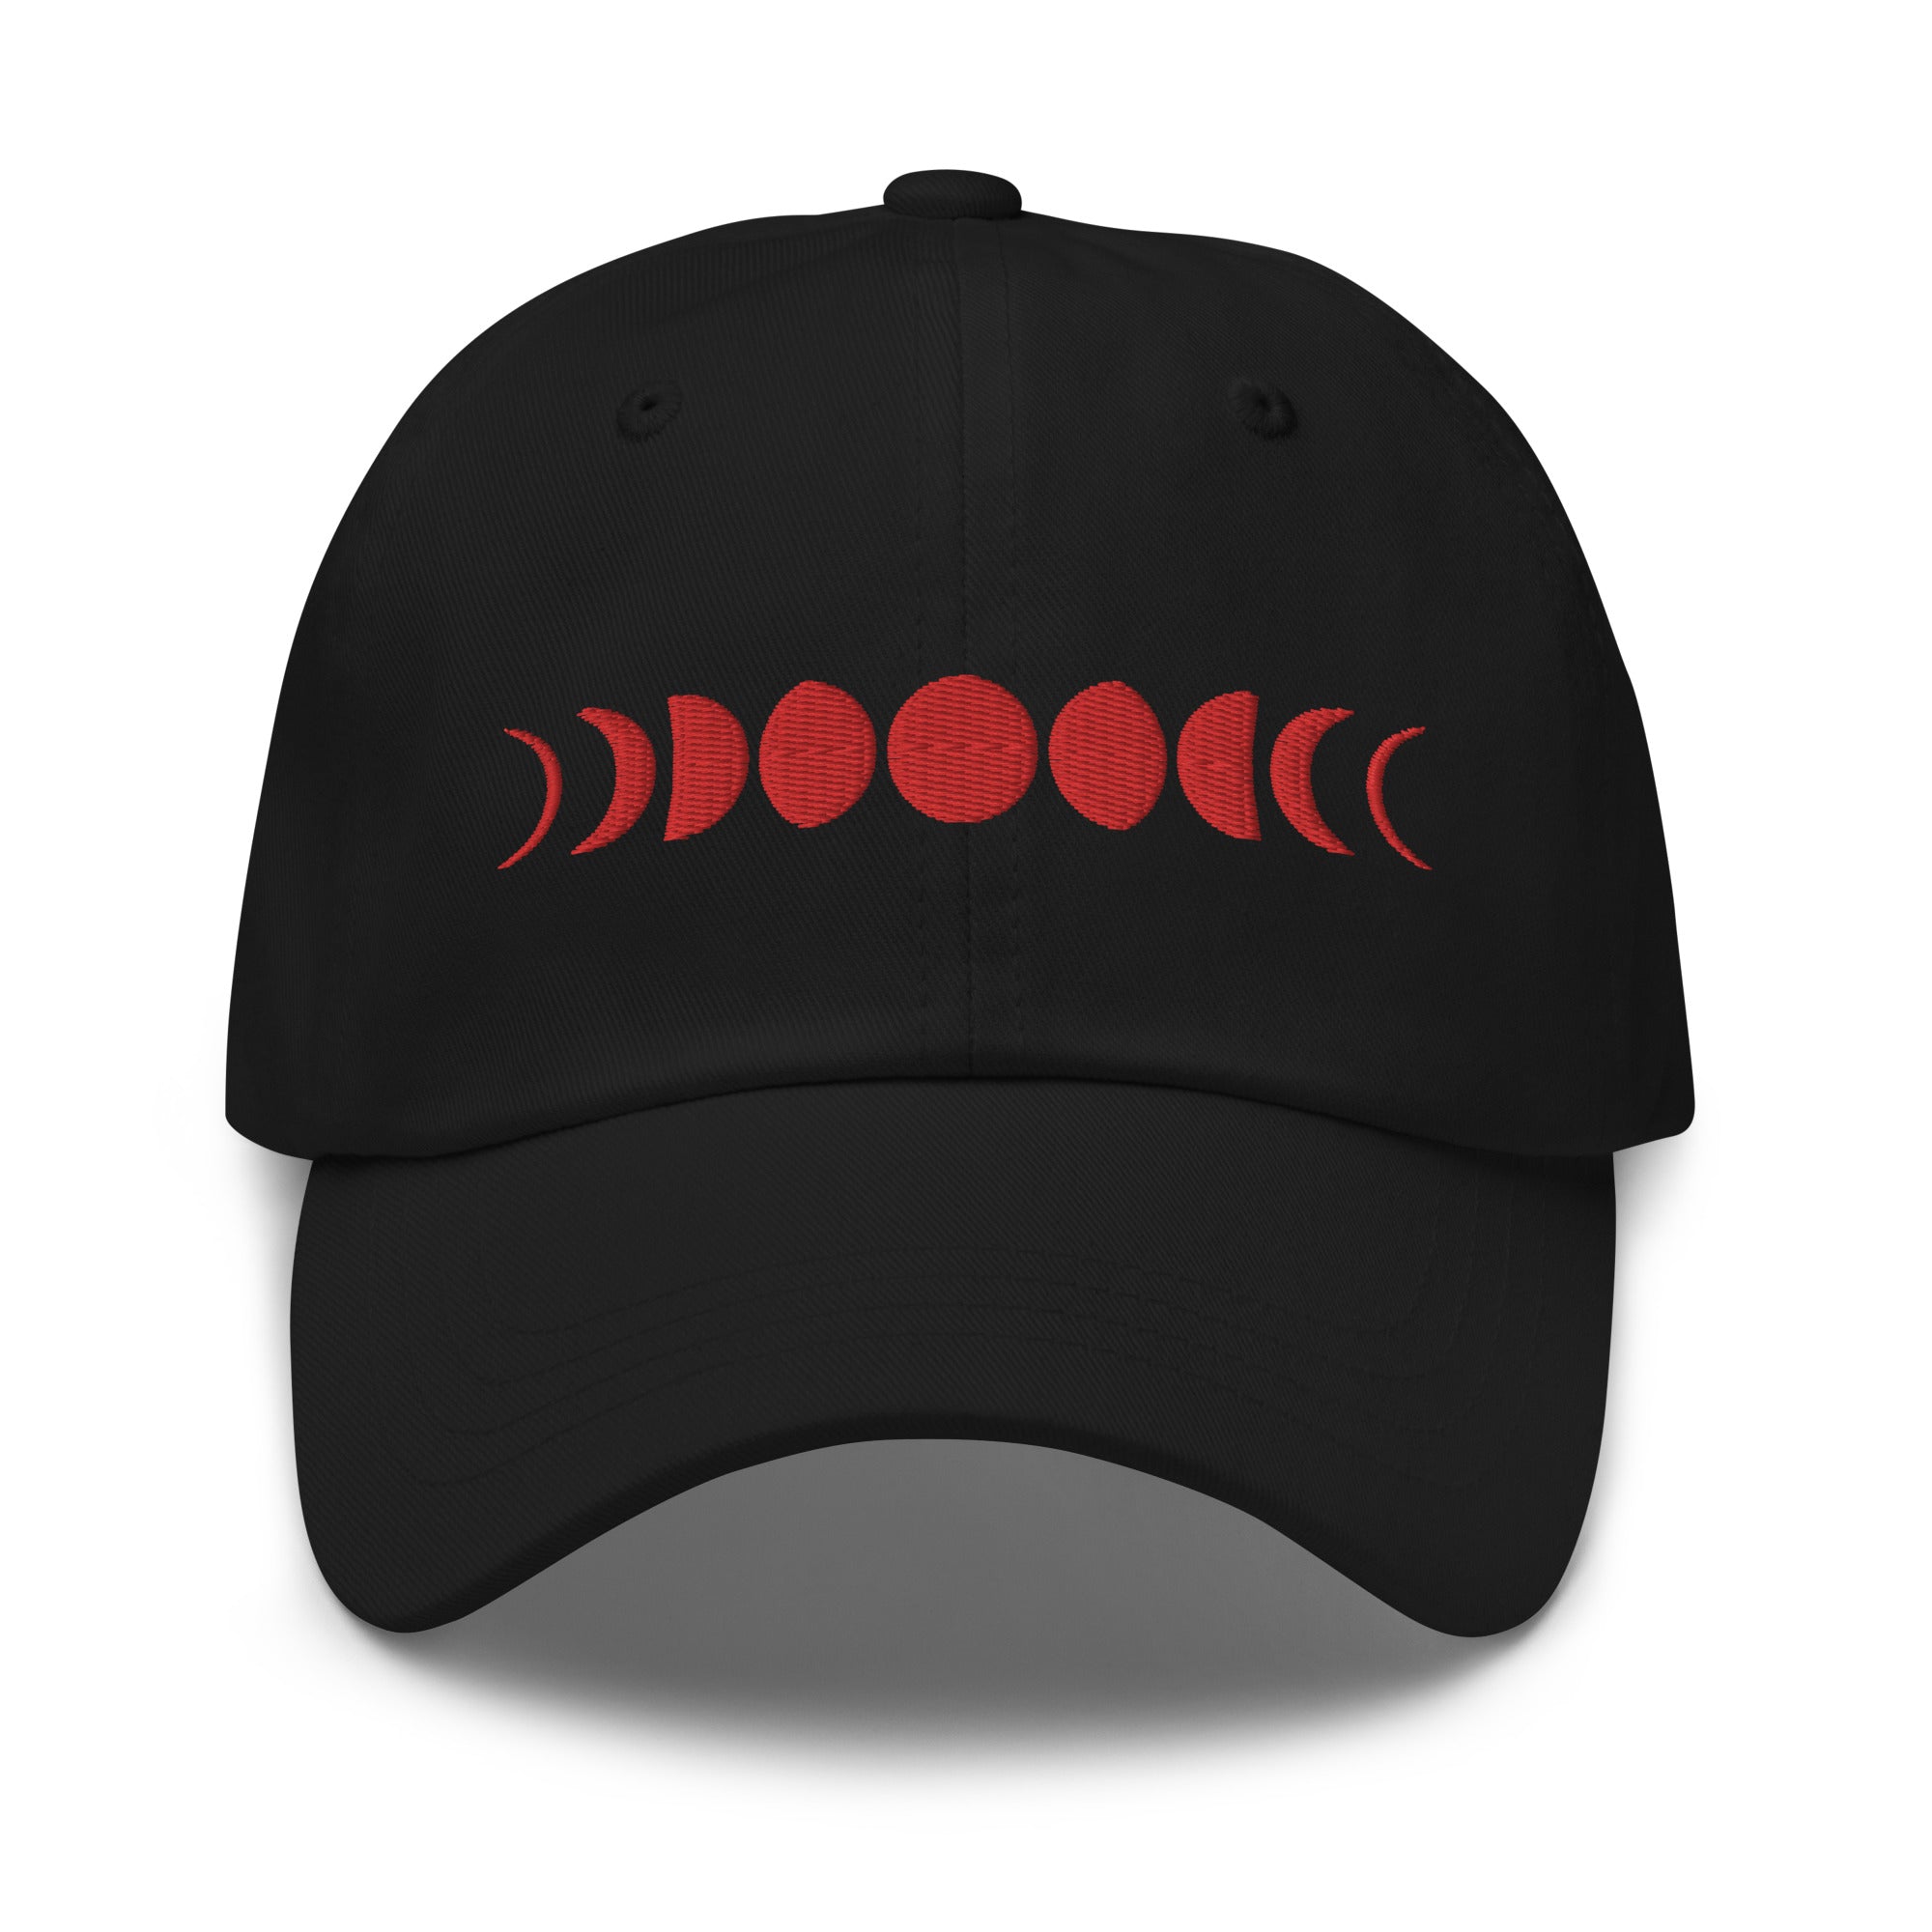 Moon Phases Lunar Cycle to Full Moon Embroidered Baseball Cap Dad hat - Edge of Life Designs